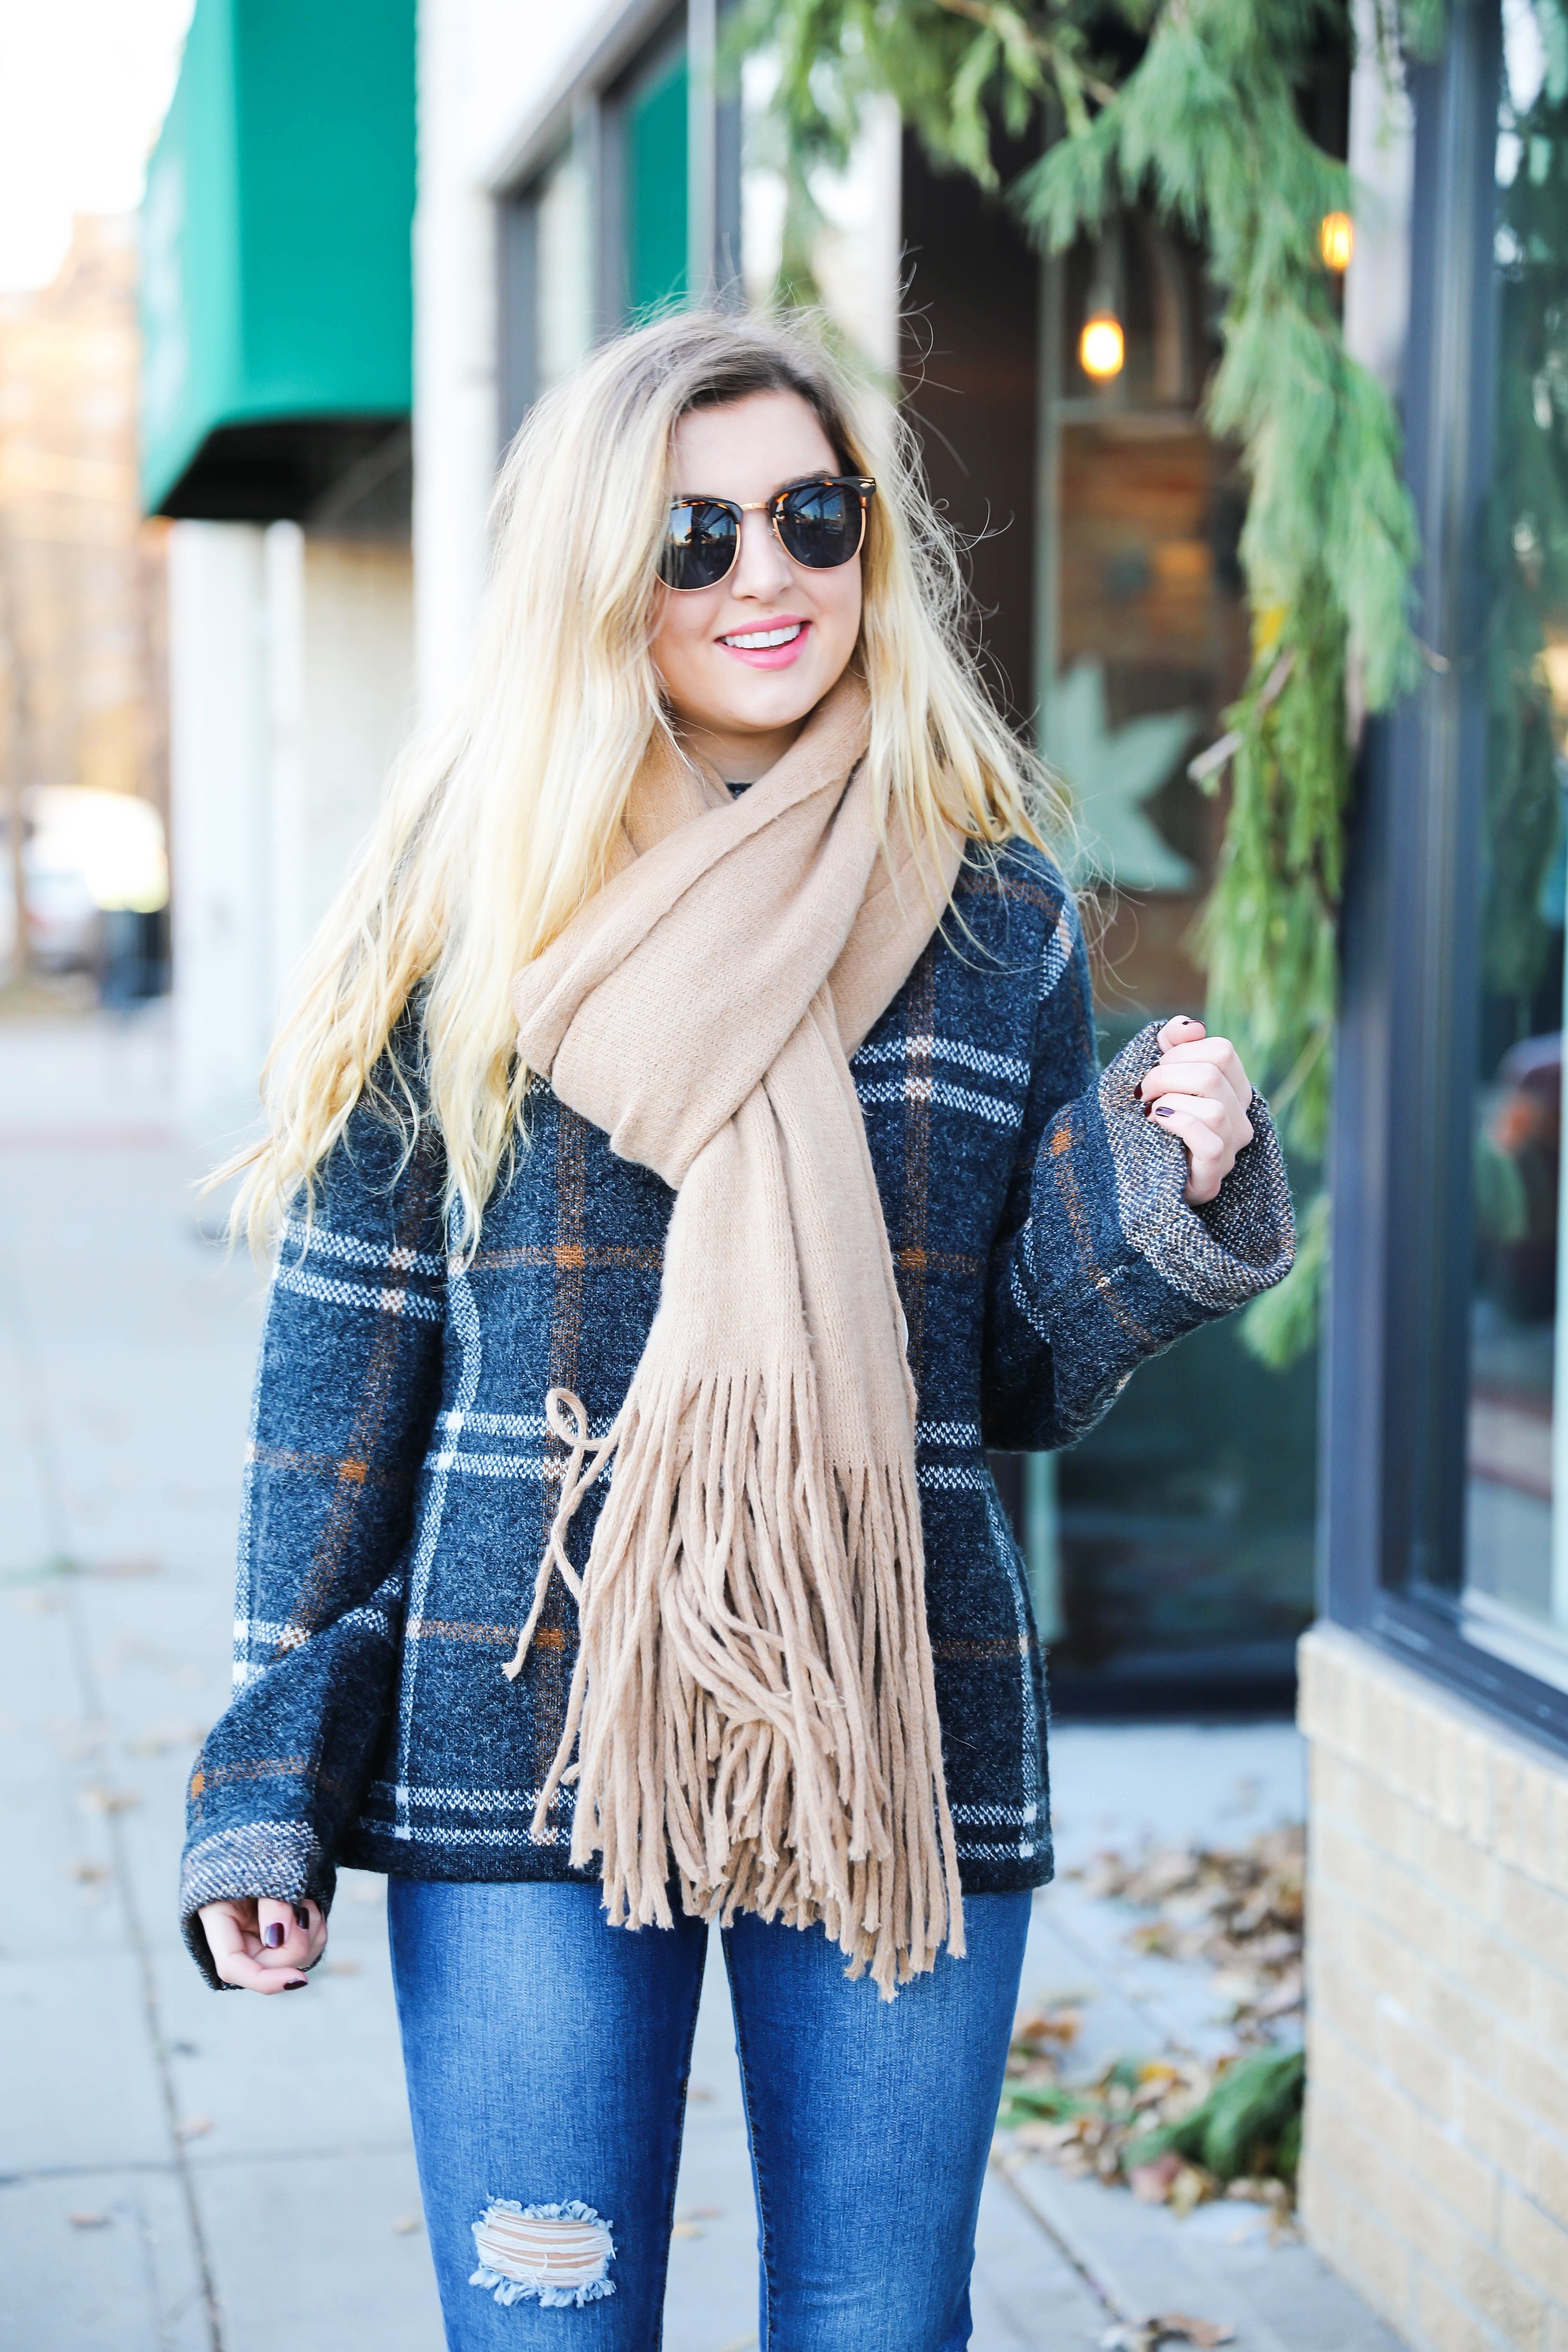 Plaid sweater with fringe free people scarf! Super cute winter outfit idea! Get all the details on fashion blog daily dose of charm by Lauren Lindmark